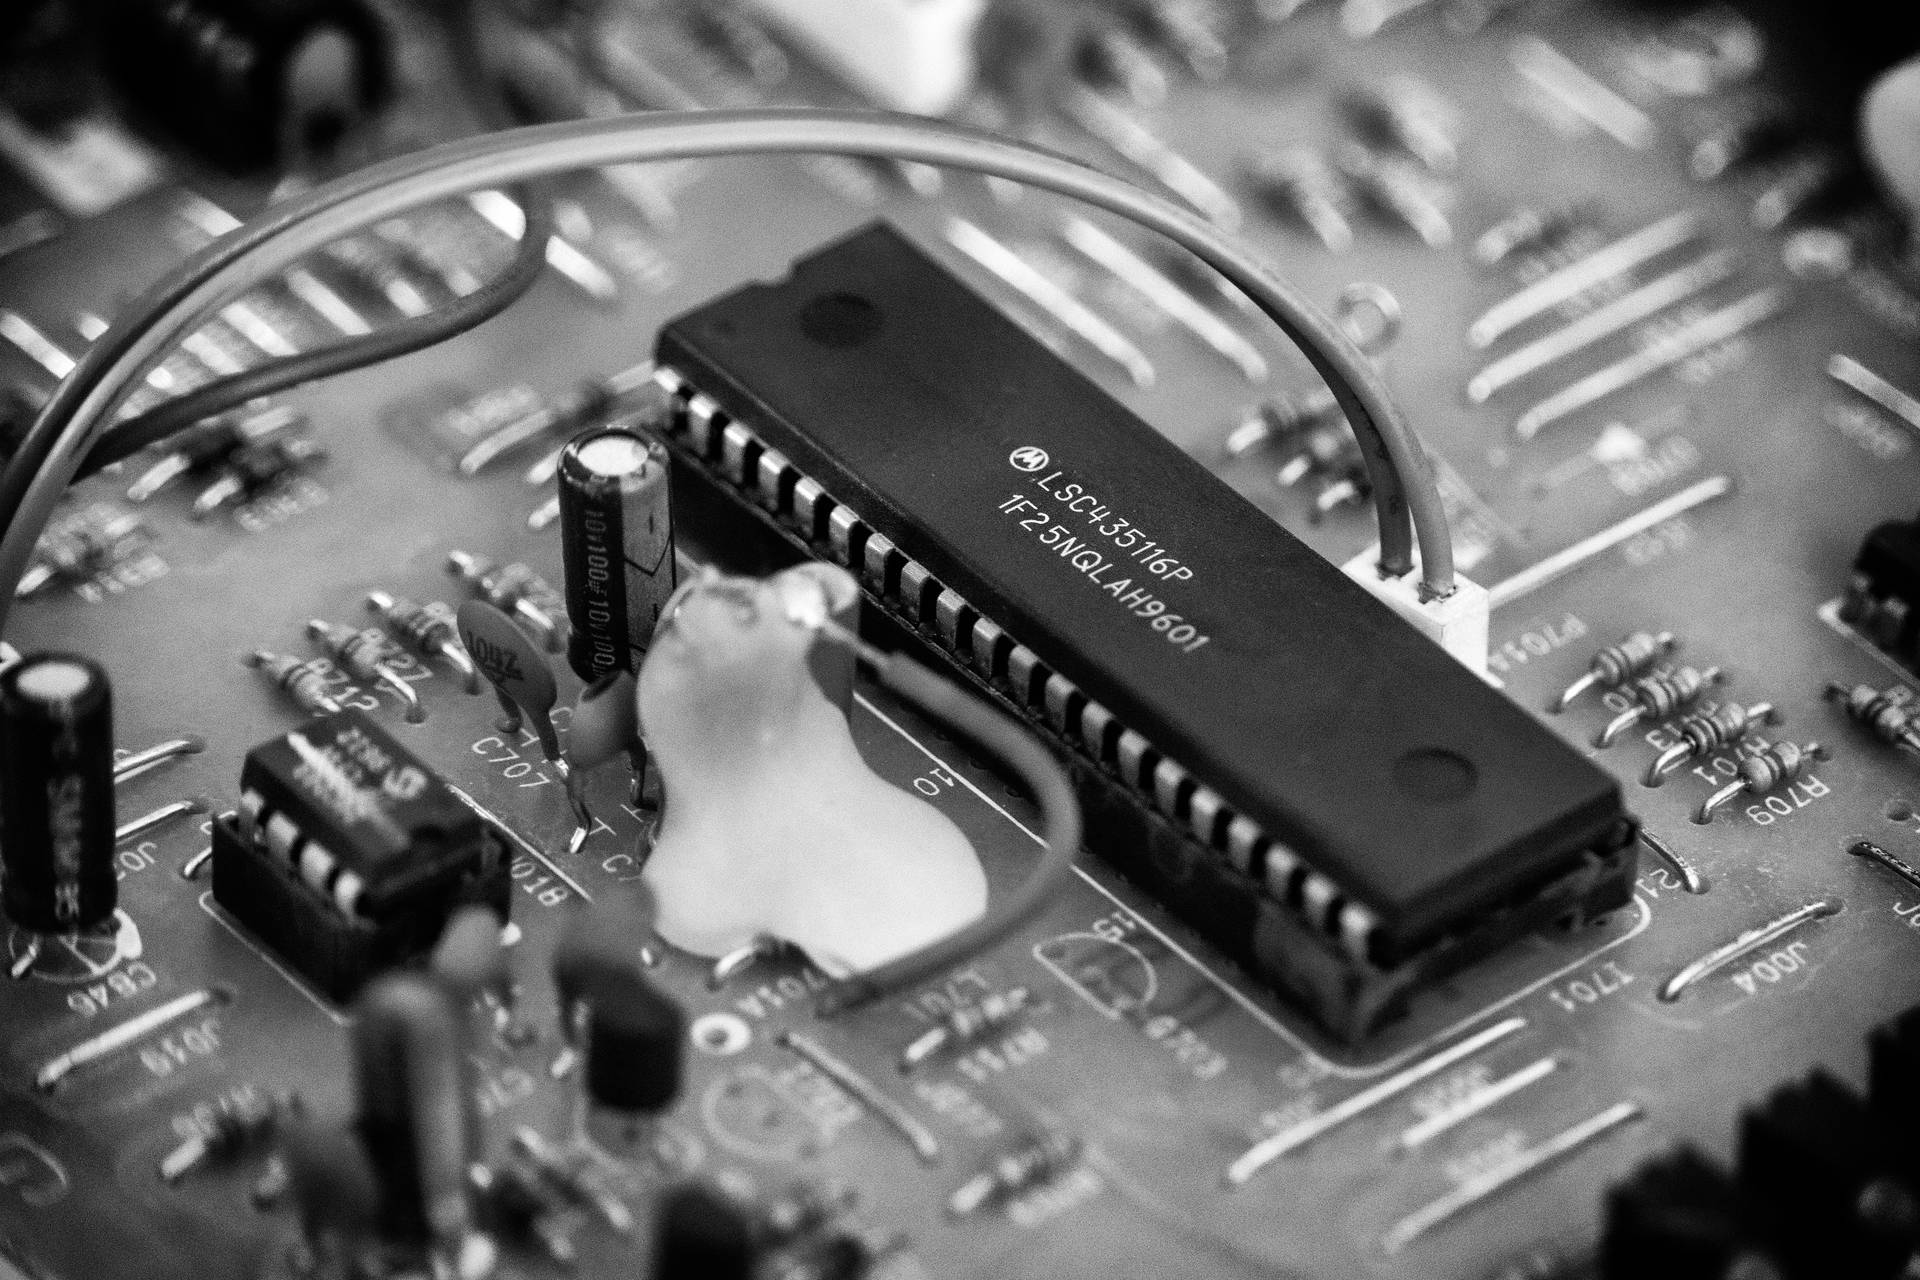 Caption: Advanced Modern Motherboard Close-up View Background